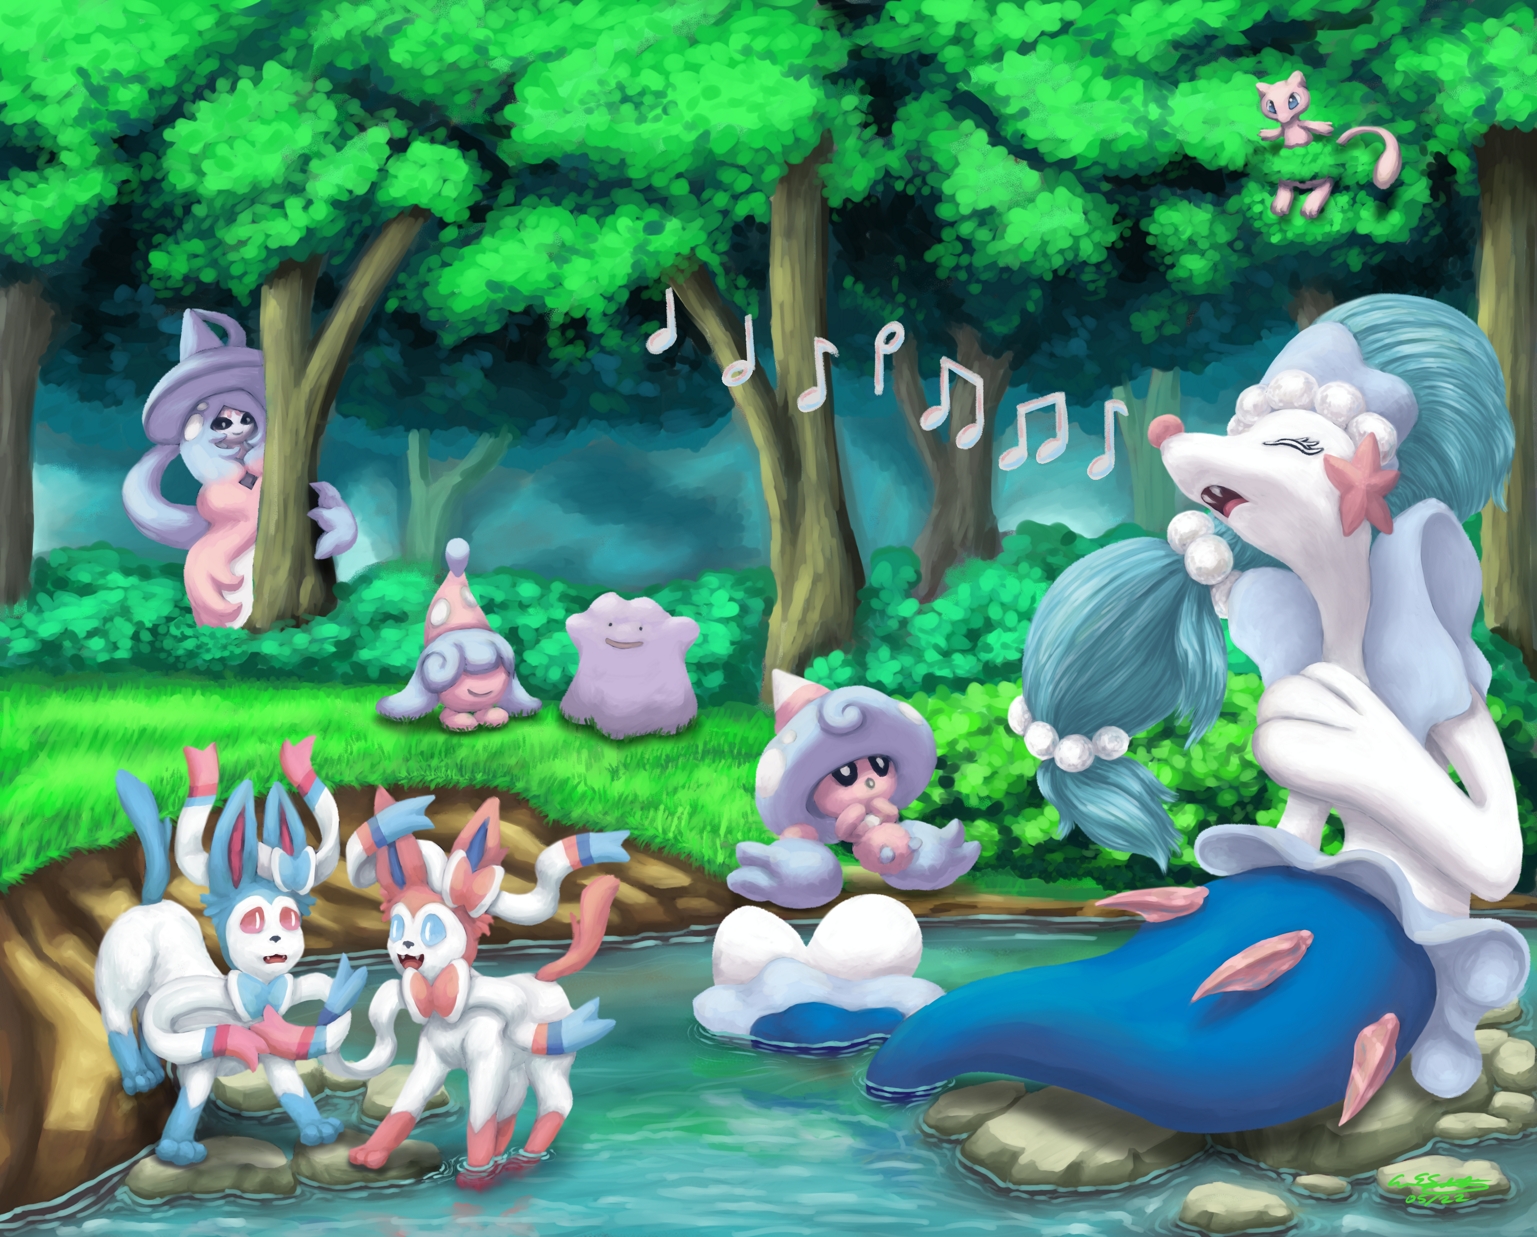 A digital illustration of Pokémon from the Pokémon franchise. They are hanging out together in a forest clearing by a river. A Hatterene is hiding in the trees, a Hatenna and Ditto are playing in the grass, a Hattrem is watching a Primarina sing in the river, and a Sylveon is trying to coax a Shiny Sylveon into the river to play. There is a Mew hidden in the tree tops watching the scene below.